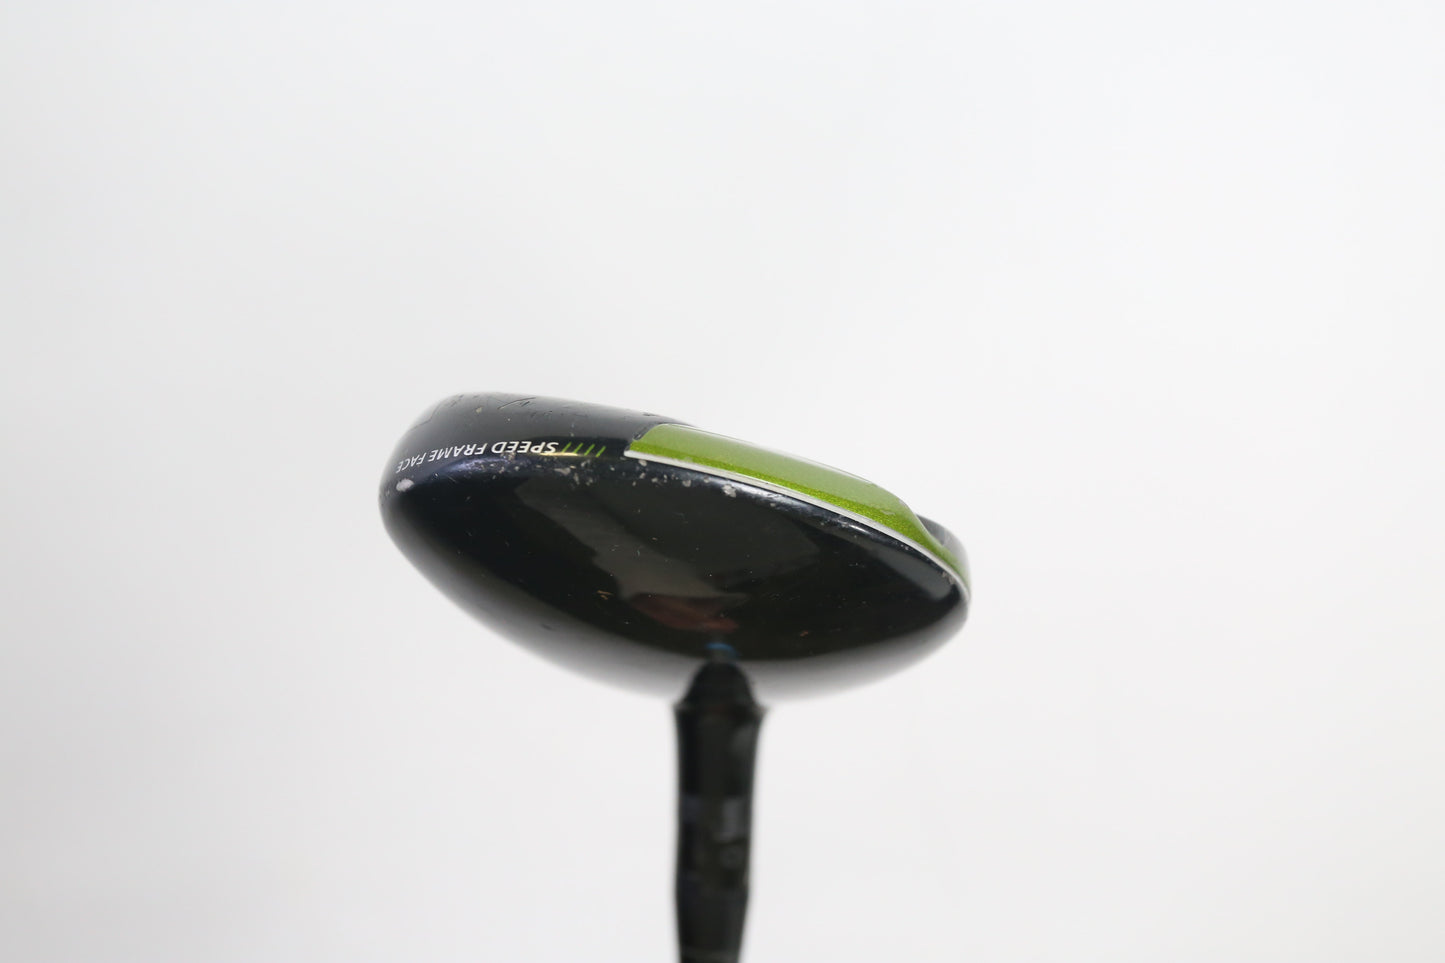 Used Callaway RAZR Fit Xtreme 7-Wood - Right-Handed - 21 Degrees - Ladies Flex